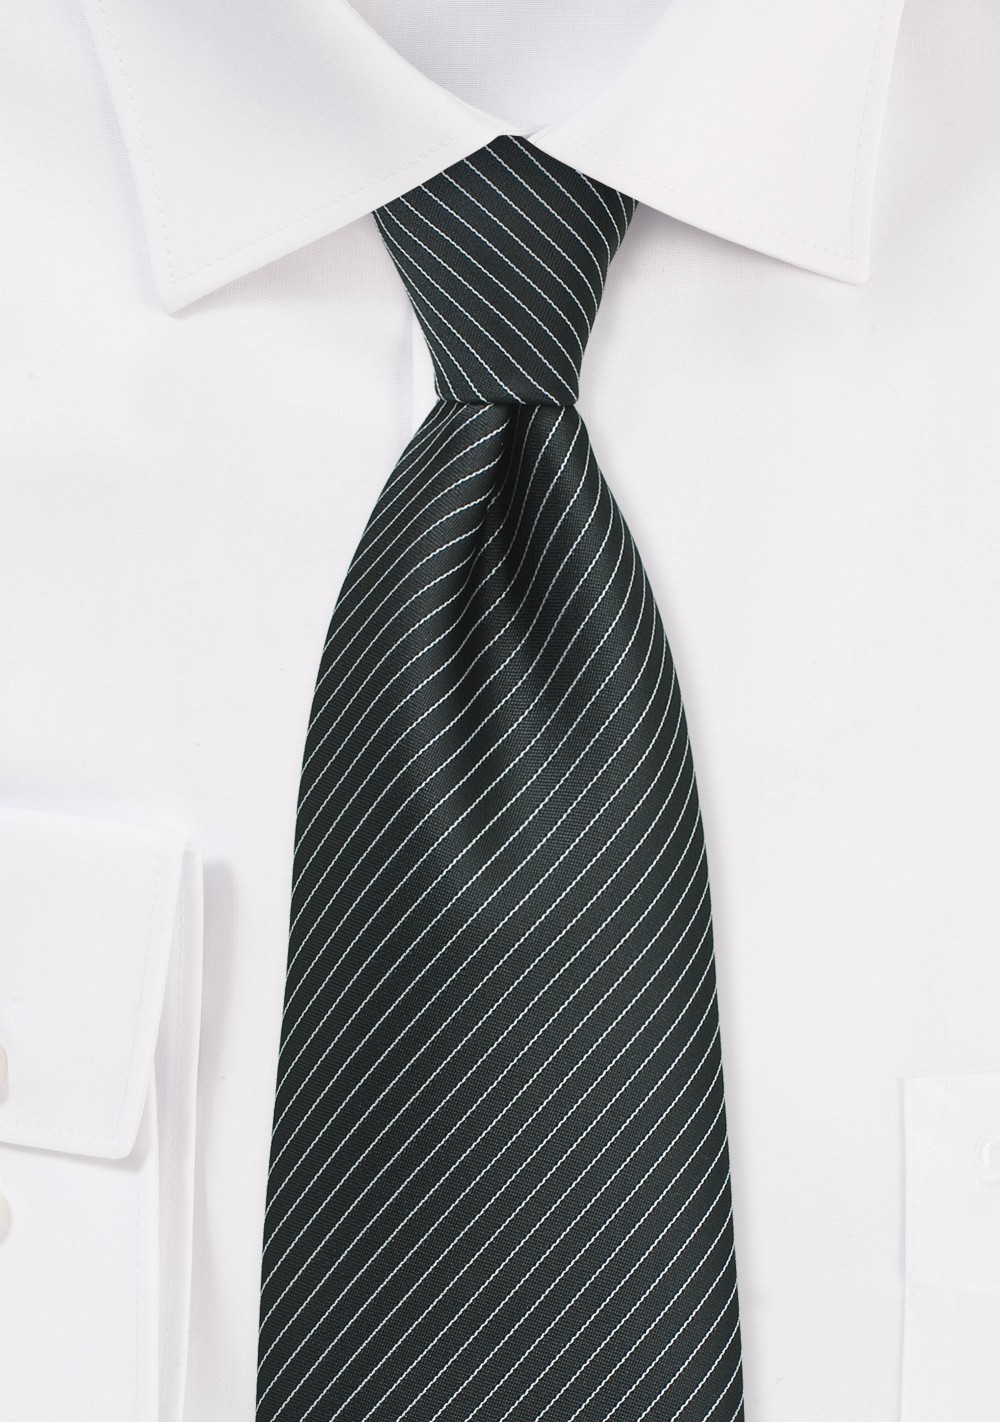 Charcoal Gray and Silver Pencil Stripe Tie